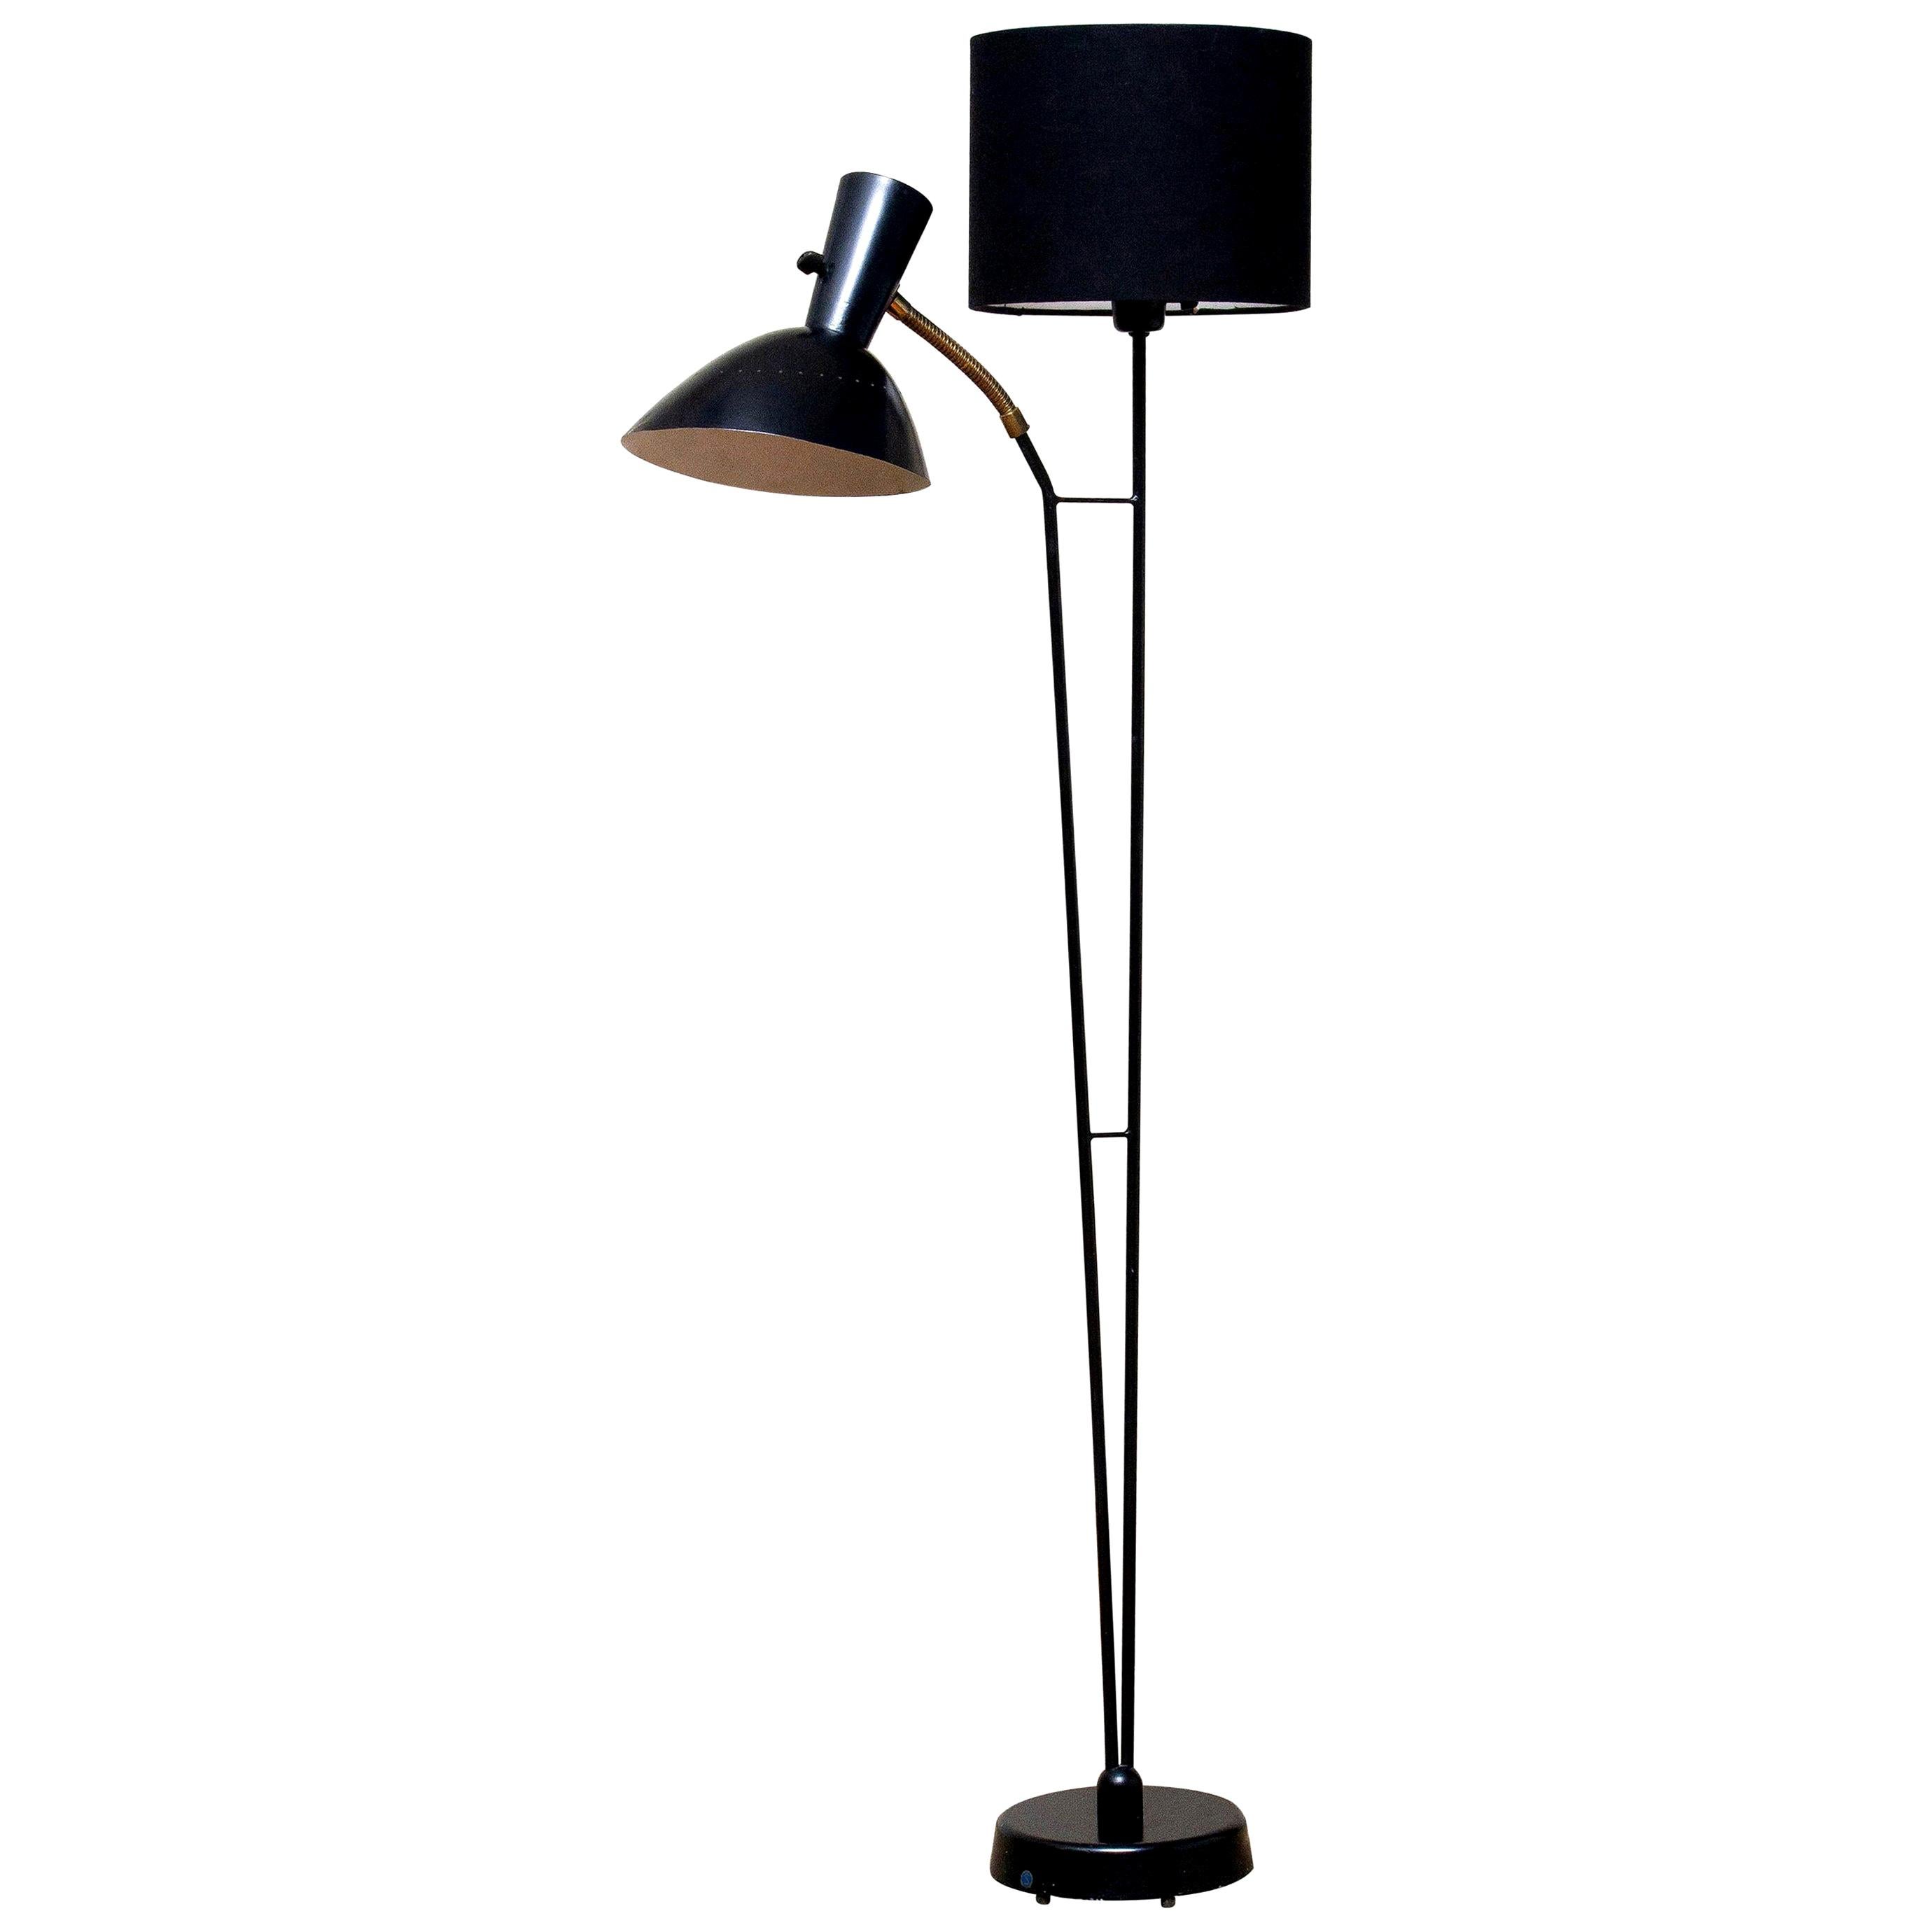 Beautiful and rare floor lamp made in the 1950s. Designed by Hans Bergström for Ateljé Lyktan in Sweden.
Measures: Height 136 cm or 54 inches.
Wide 60 cm or 24 inches.
Technically 100% and the overall condition is good.
The black fabric shade is